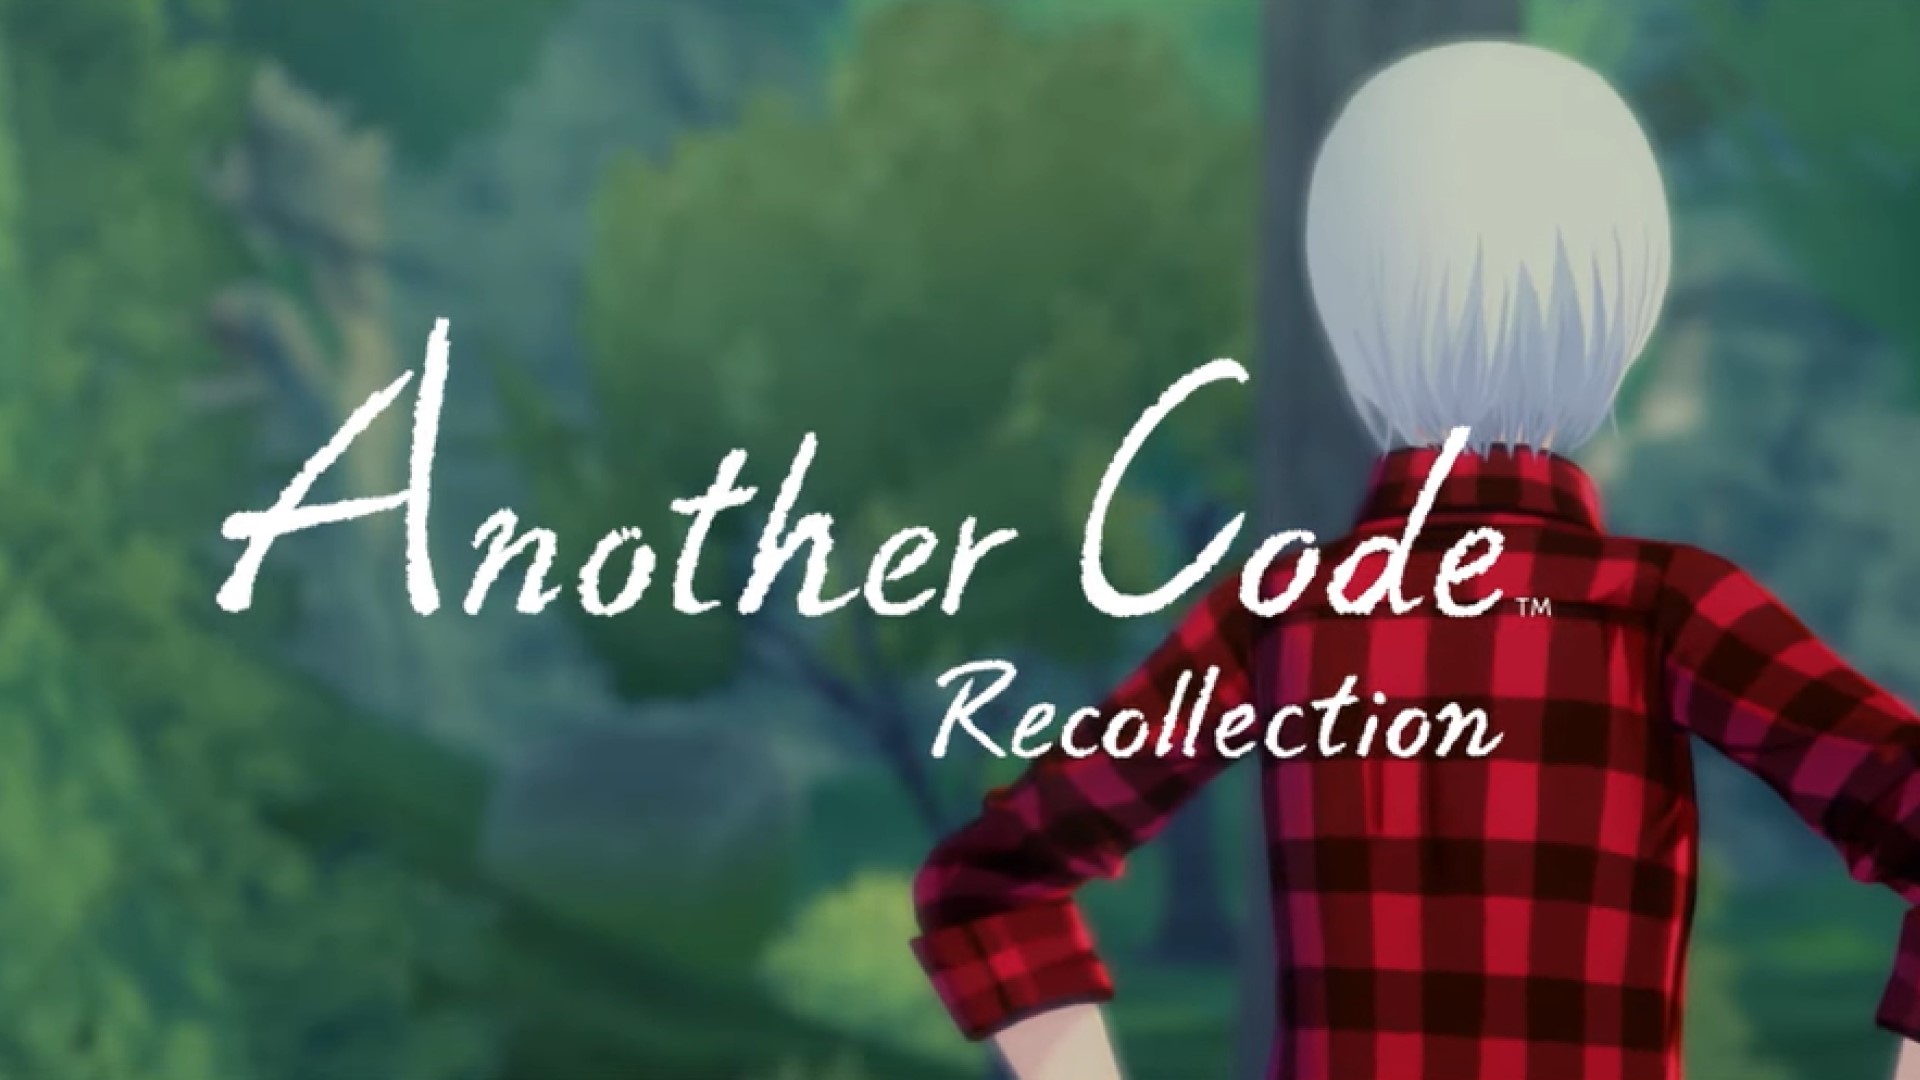 Recollection Receives New Overview Trailer, Free Demo Out Now